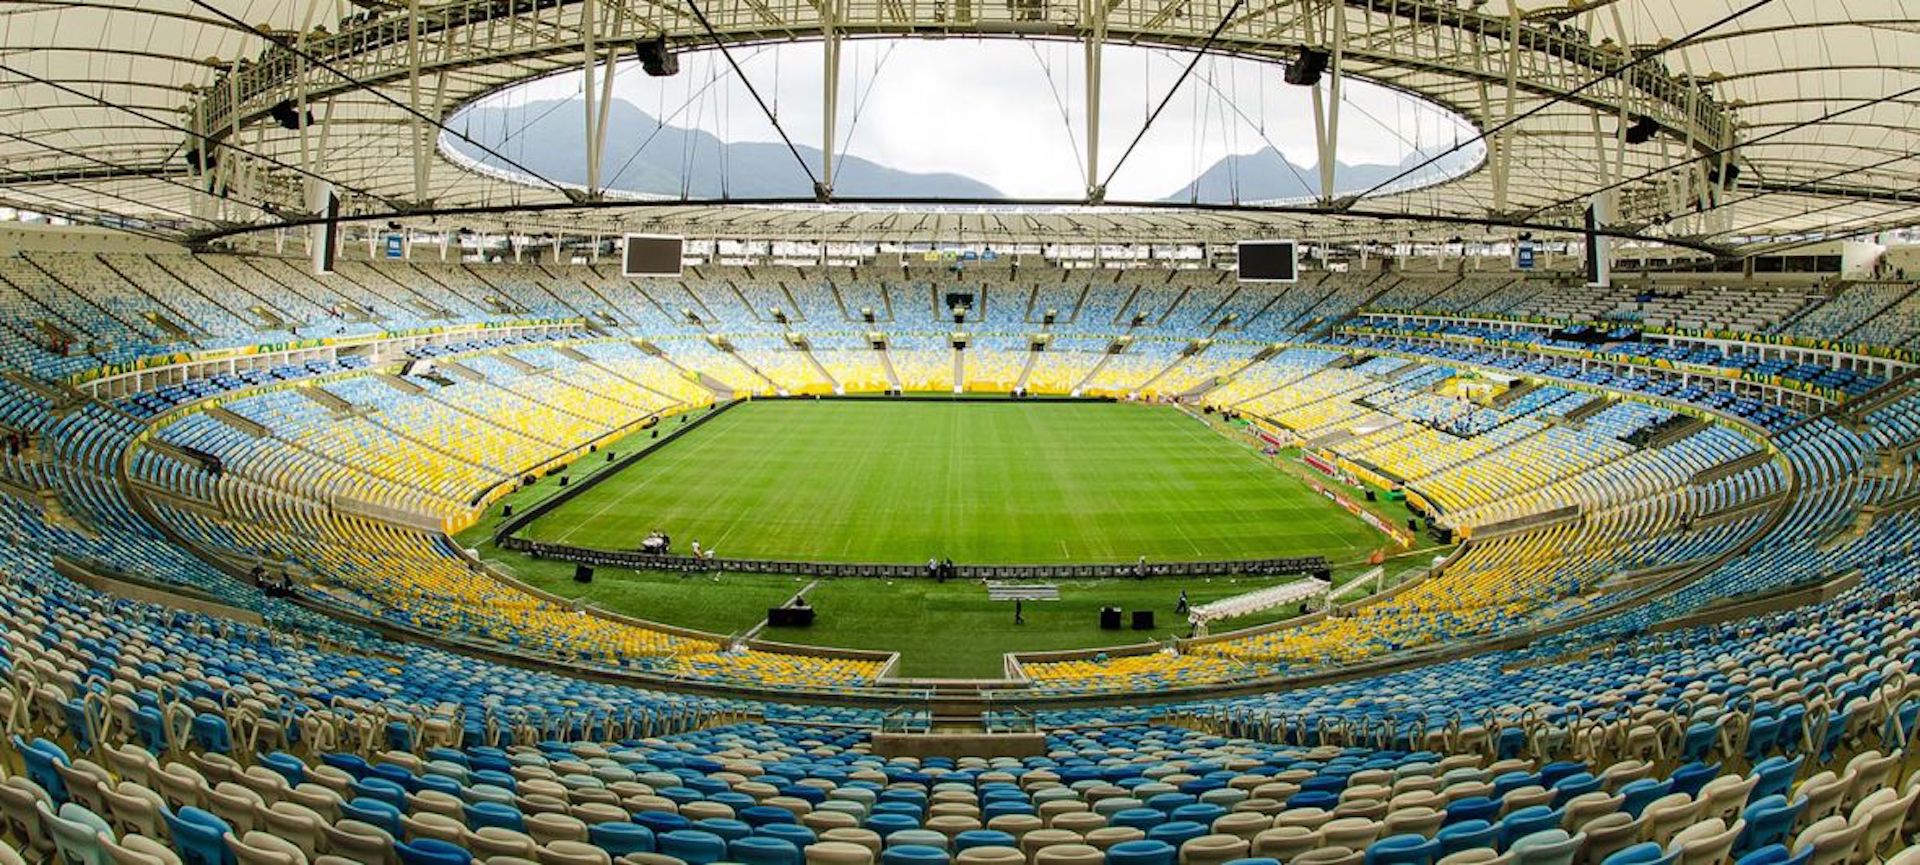 Brazil,Brazil's most famous soccer stadium, Maracanã, will be used to house Covid-19 patients.